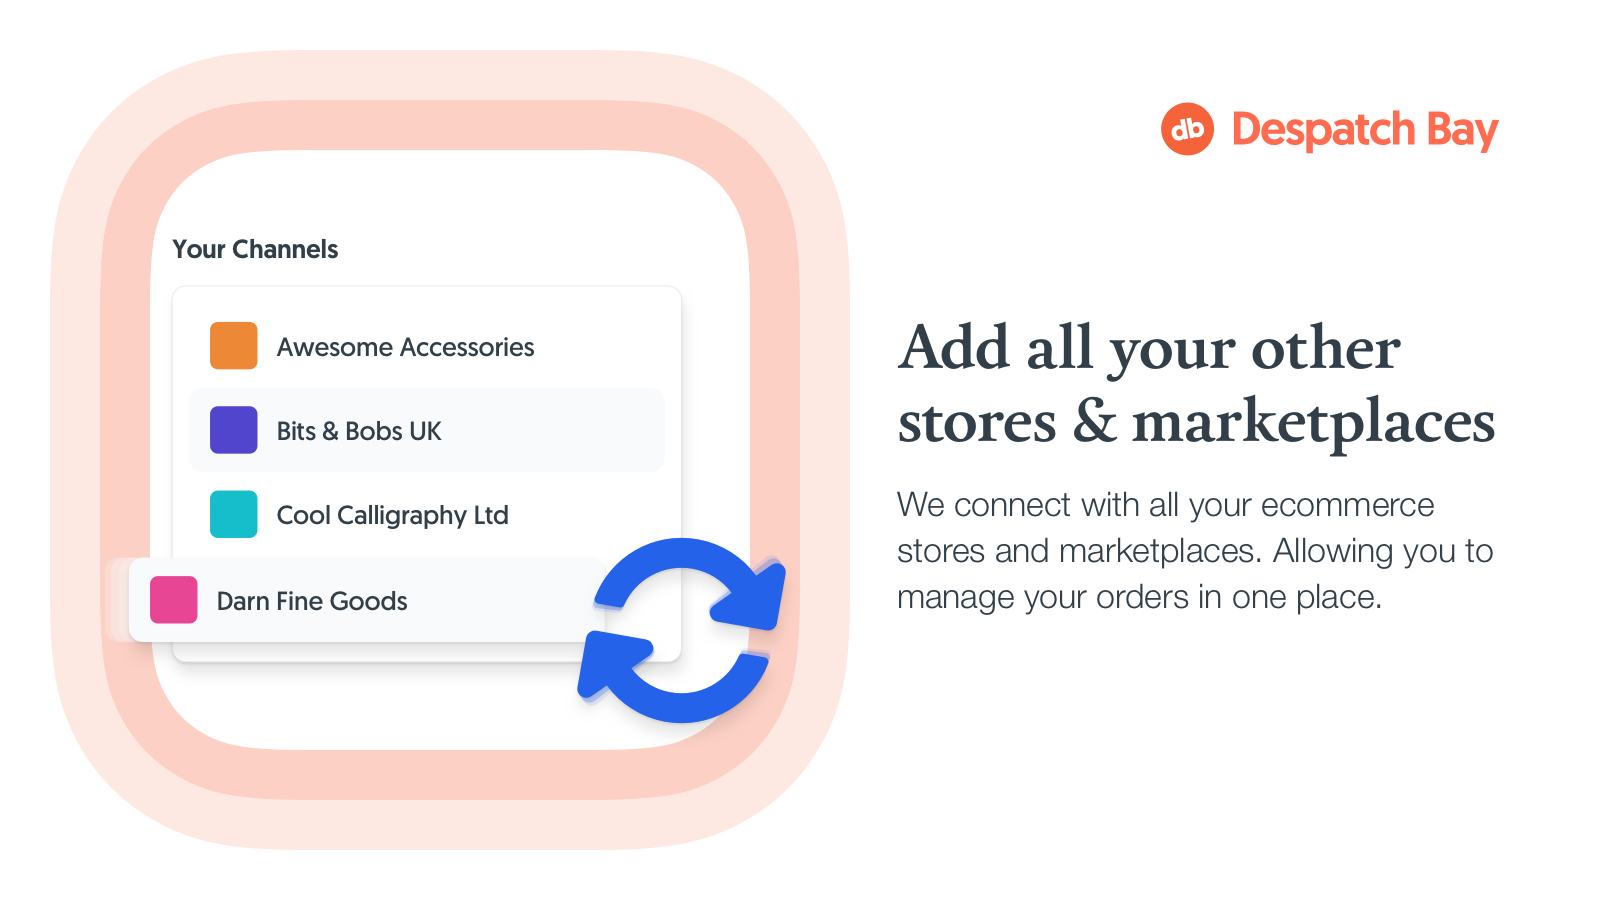 Add all your other stores & marketplaces